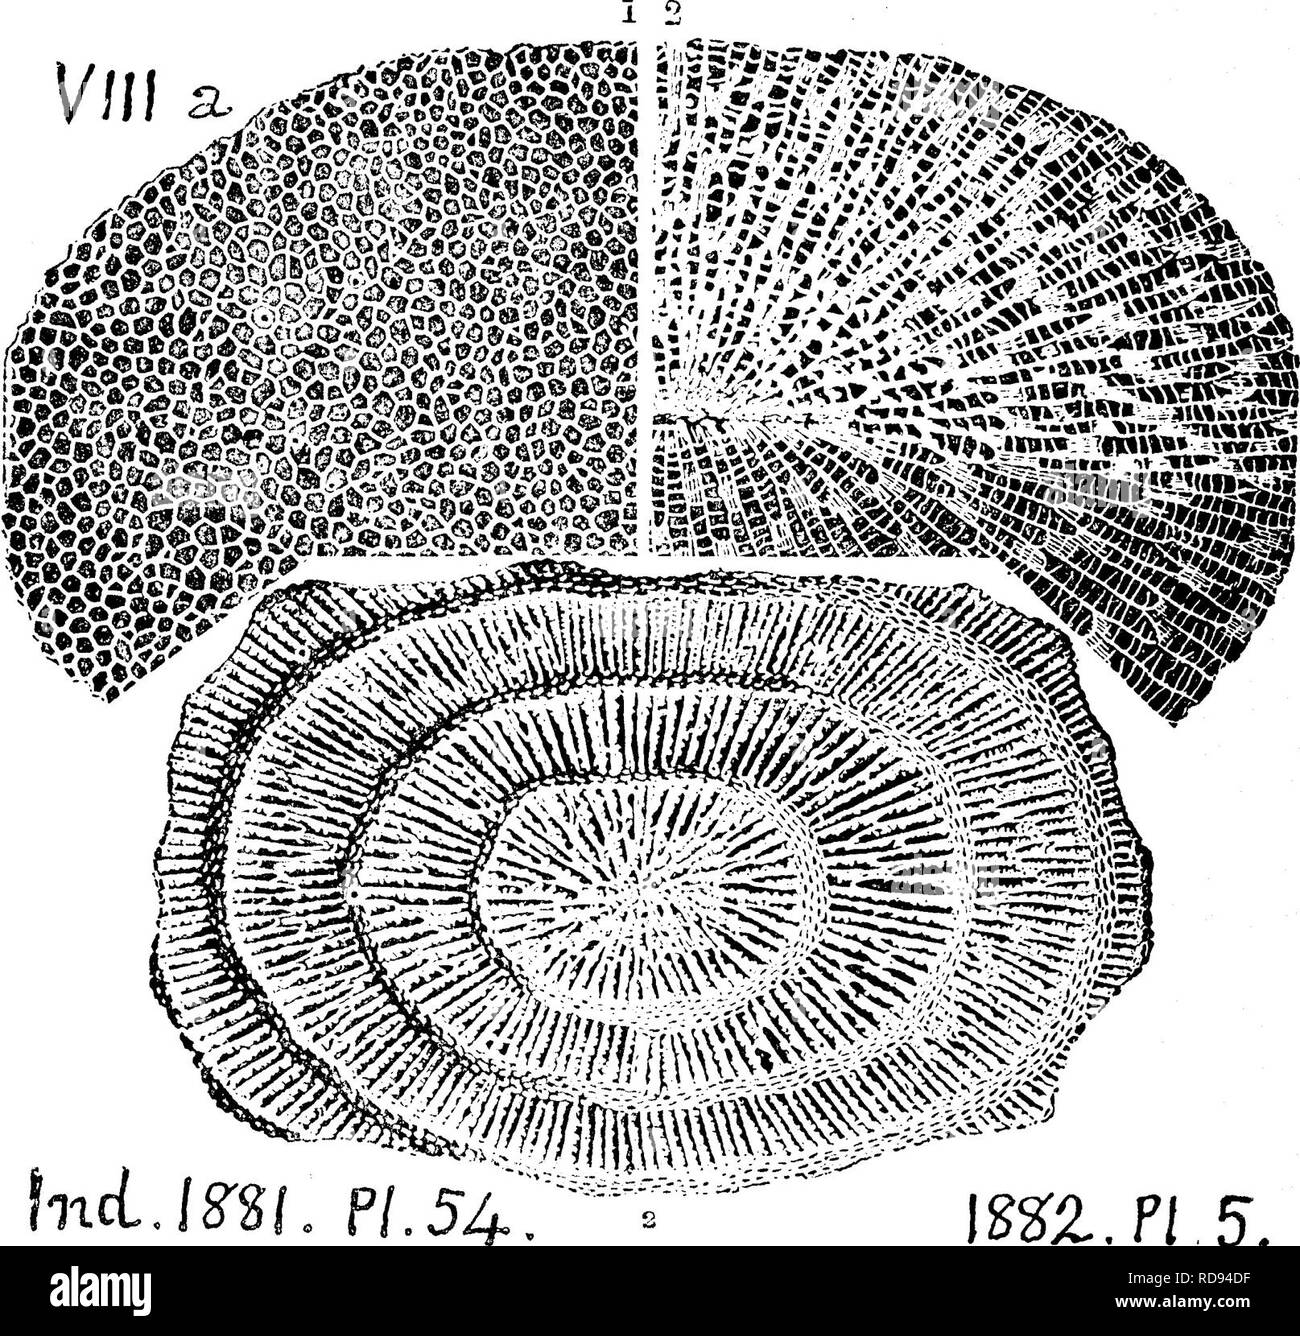 . A dictionary of the fossils of Pennsylvania and neighboring states named in the reports and catalogues of the survey ... Paleontology. 241 Favo, out of its matrix, at McConnelltowii cliffs, Huntingdon Co. (T3, 201); and among Strornatopora in Juniata Sand Oo.'s quarry cliff on Mill cr. (p. 269.)—In Bedford Co., abundant in transition lime-sand beds of L. Held, into Oriskany, Hyndman sect. (T2, 86); chert beds 150' below top of Oriskany (p. 104), Pine ridge, King t. (p. 134); Mann's quarry, Monroe t. (p. 187). —VI-VII.—Specimens in the cabinet (00, p. 234) 601-2,3, 28, and 601-33 (eight speci Stock Photo